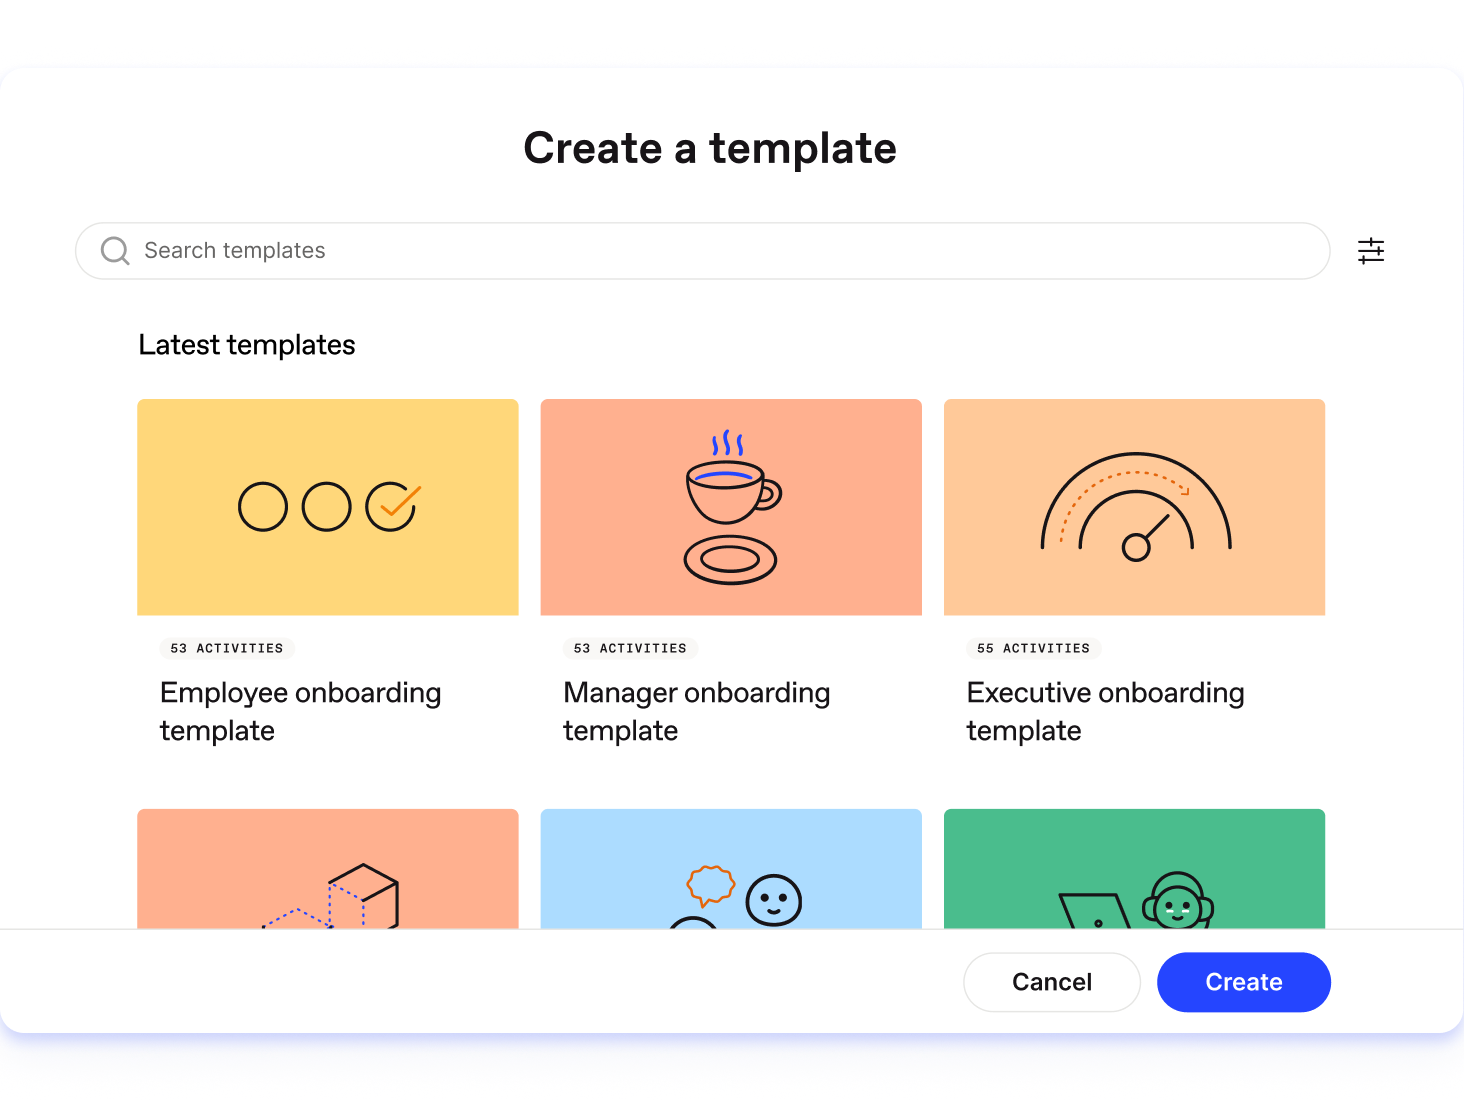 list of different employee onboarding templates available in Workleap Onboarding